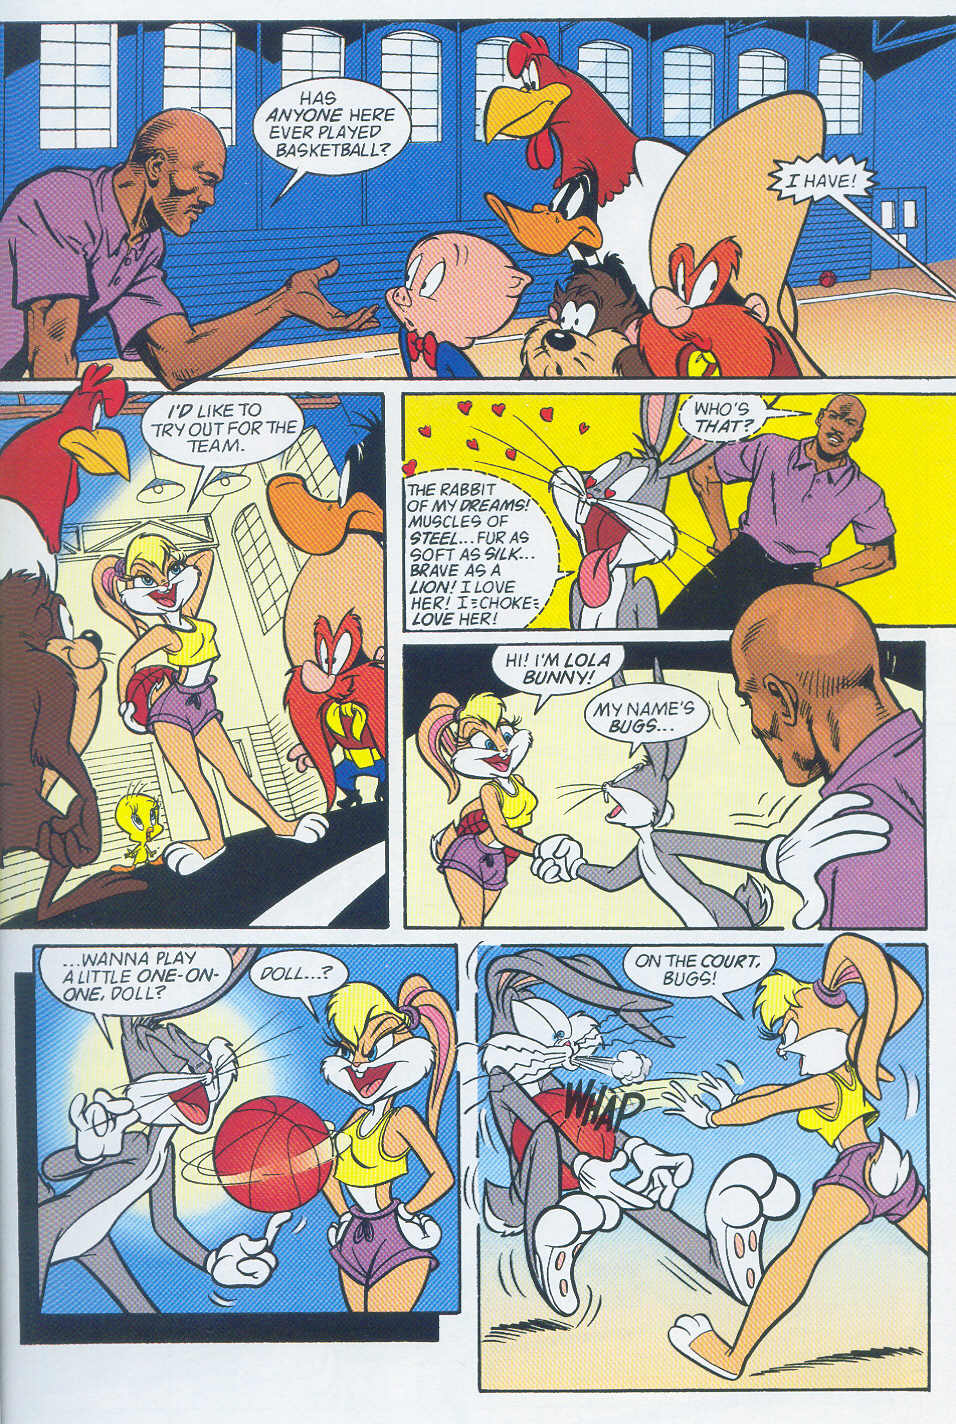 Read online Space Jam comic -  Issue # Full - 23